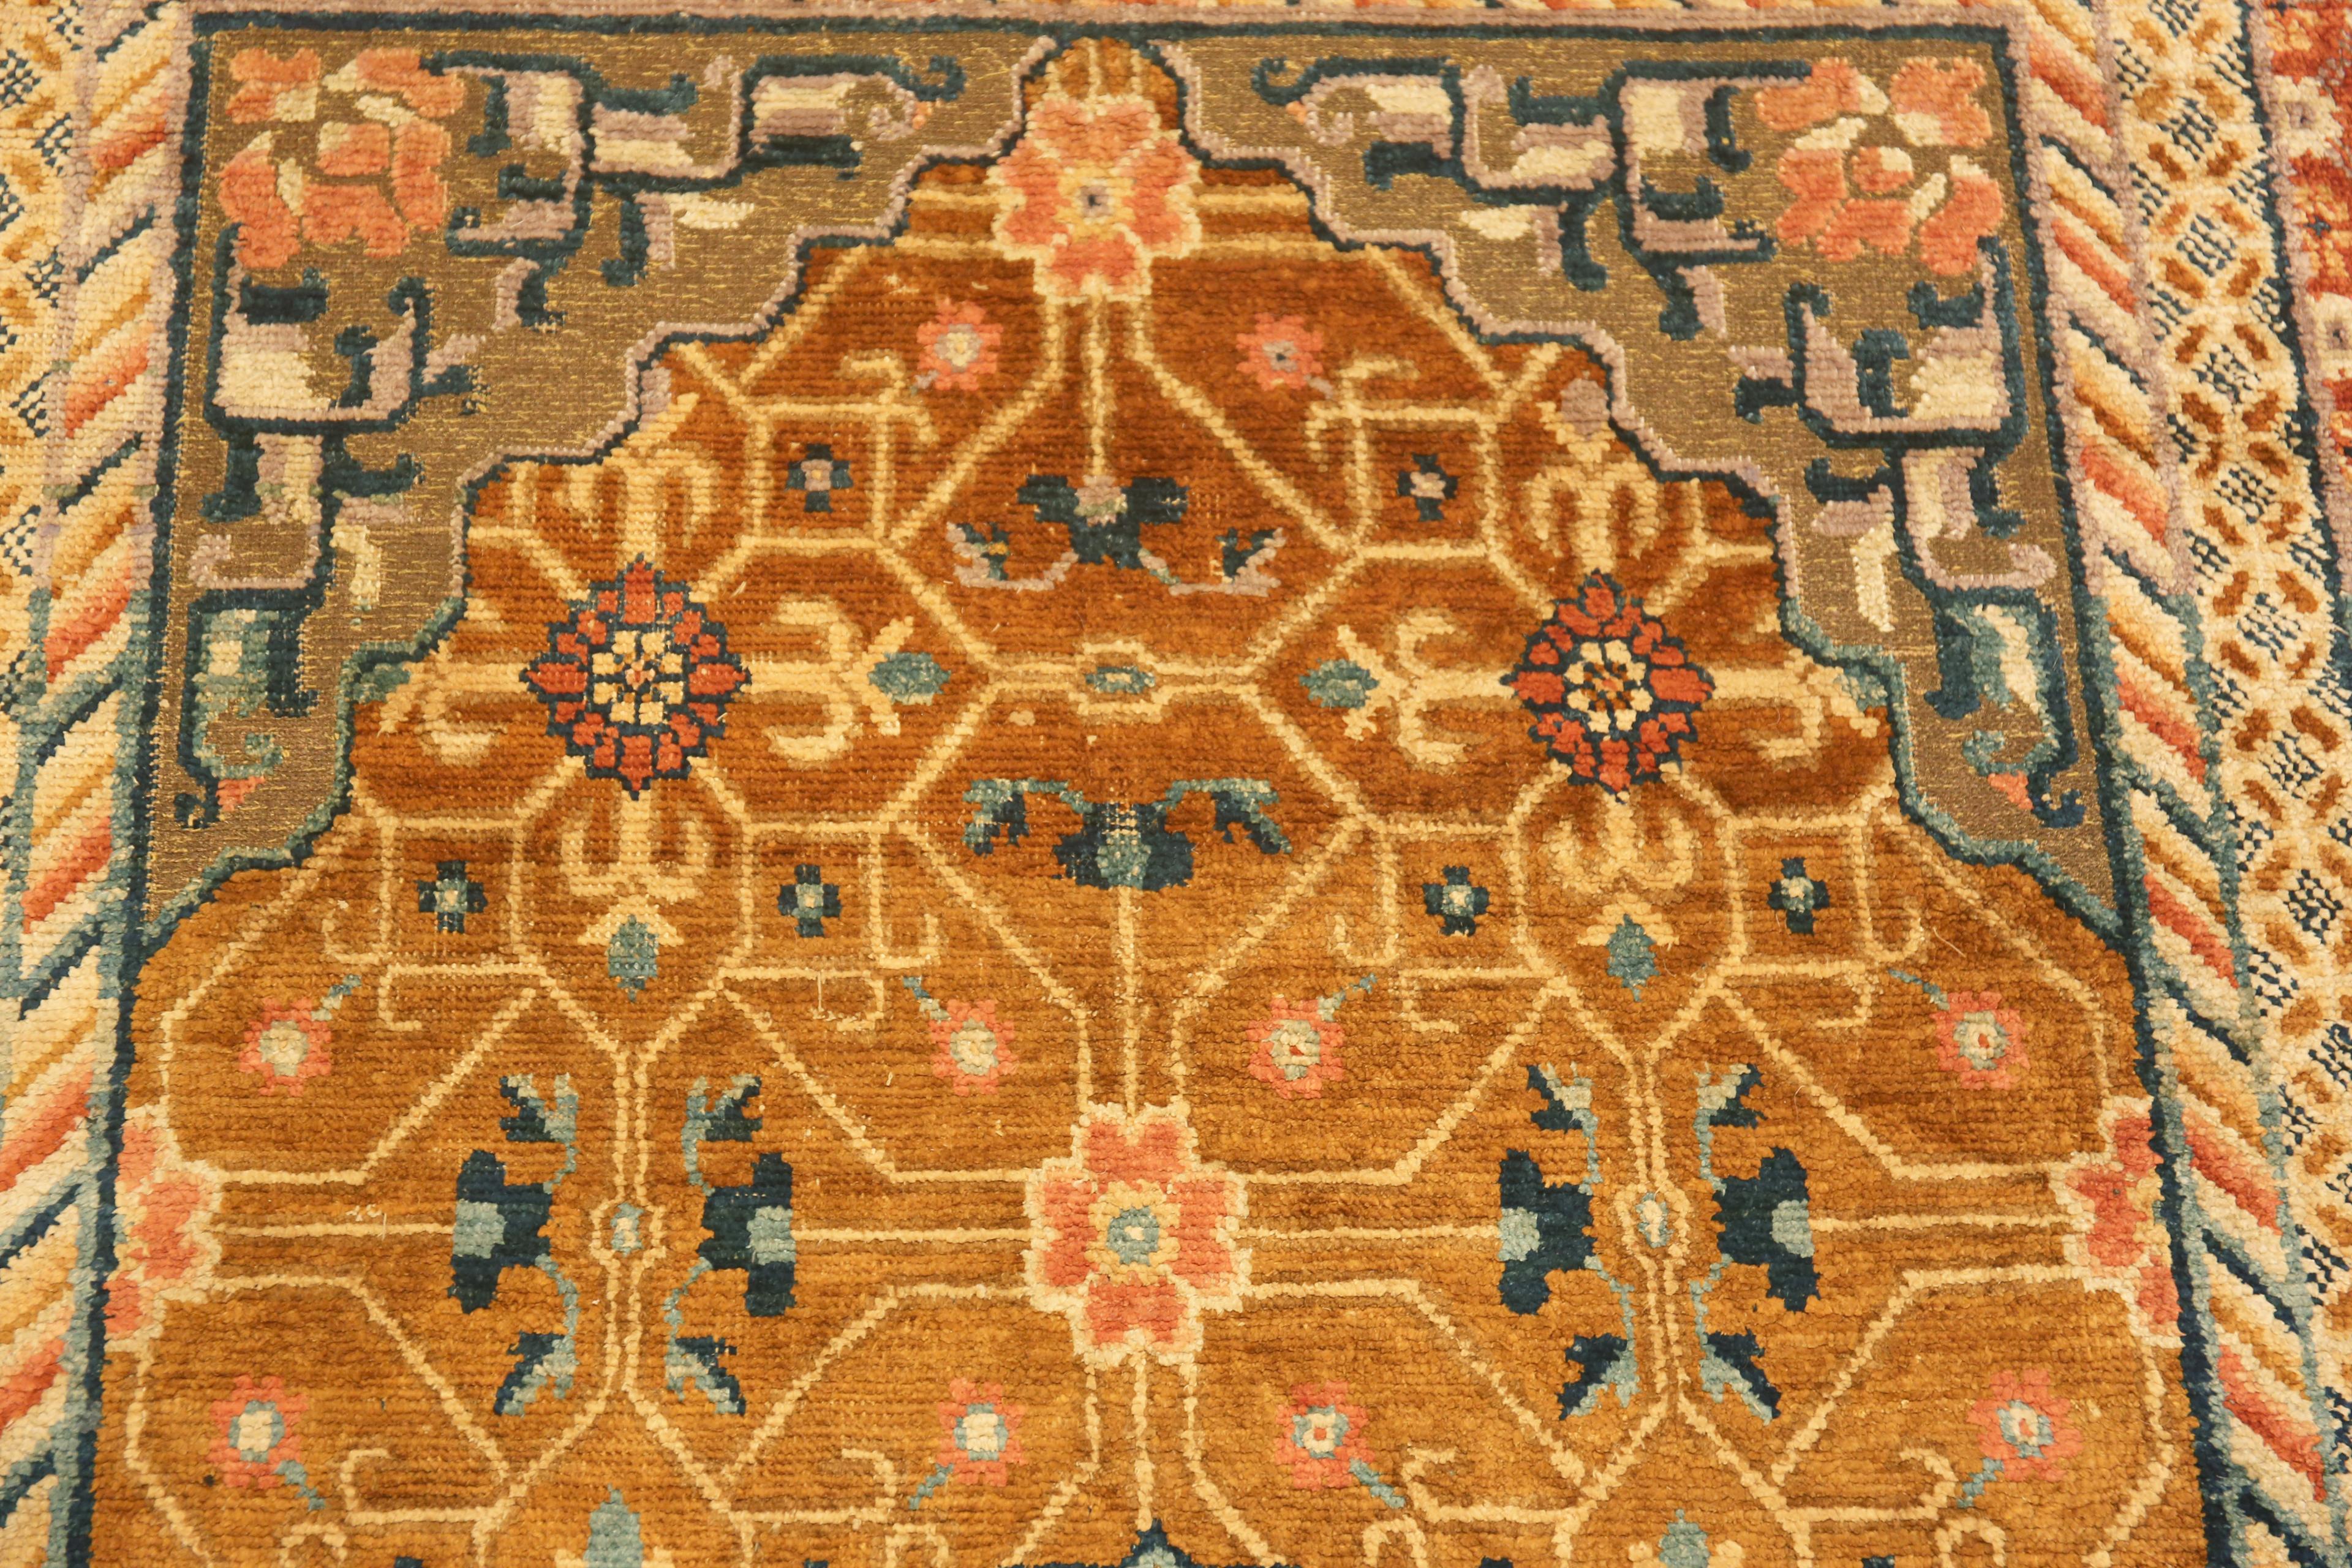 Truly Magnificent Rare and Collectible Antique Mid 19th Century Chinese Metallic and Silk Pile Rug, Country of Origin / Rug Type: Antiker chinesischer Teppich, CIRCA Datum: Mitte 19. Jahrhundert Teppich